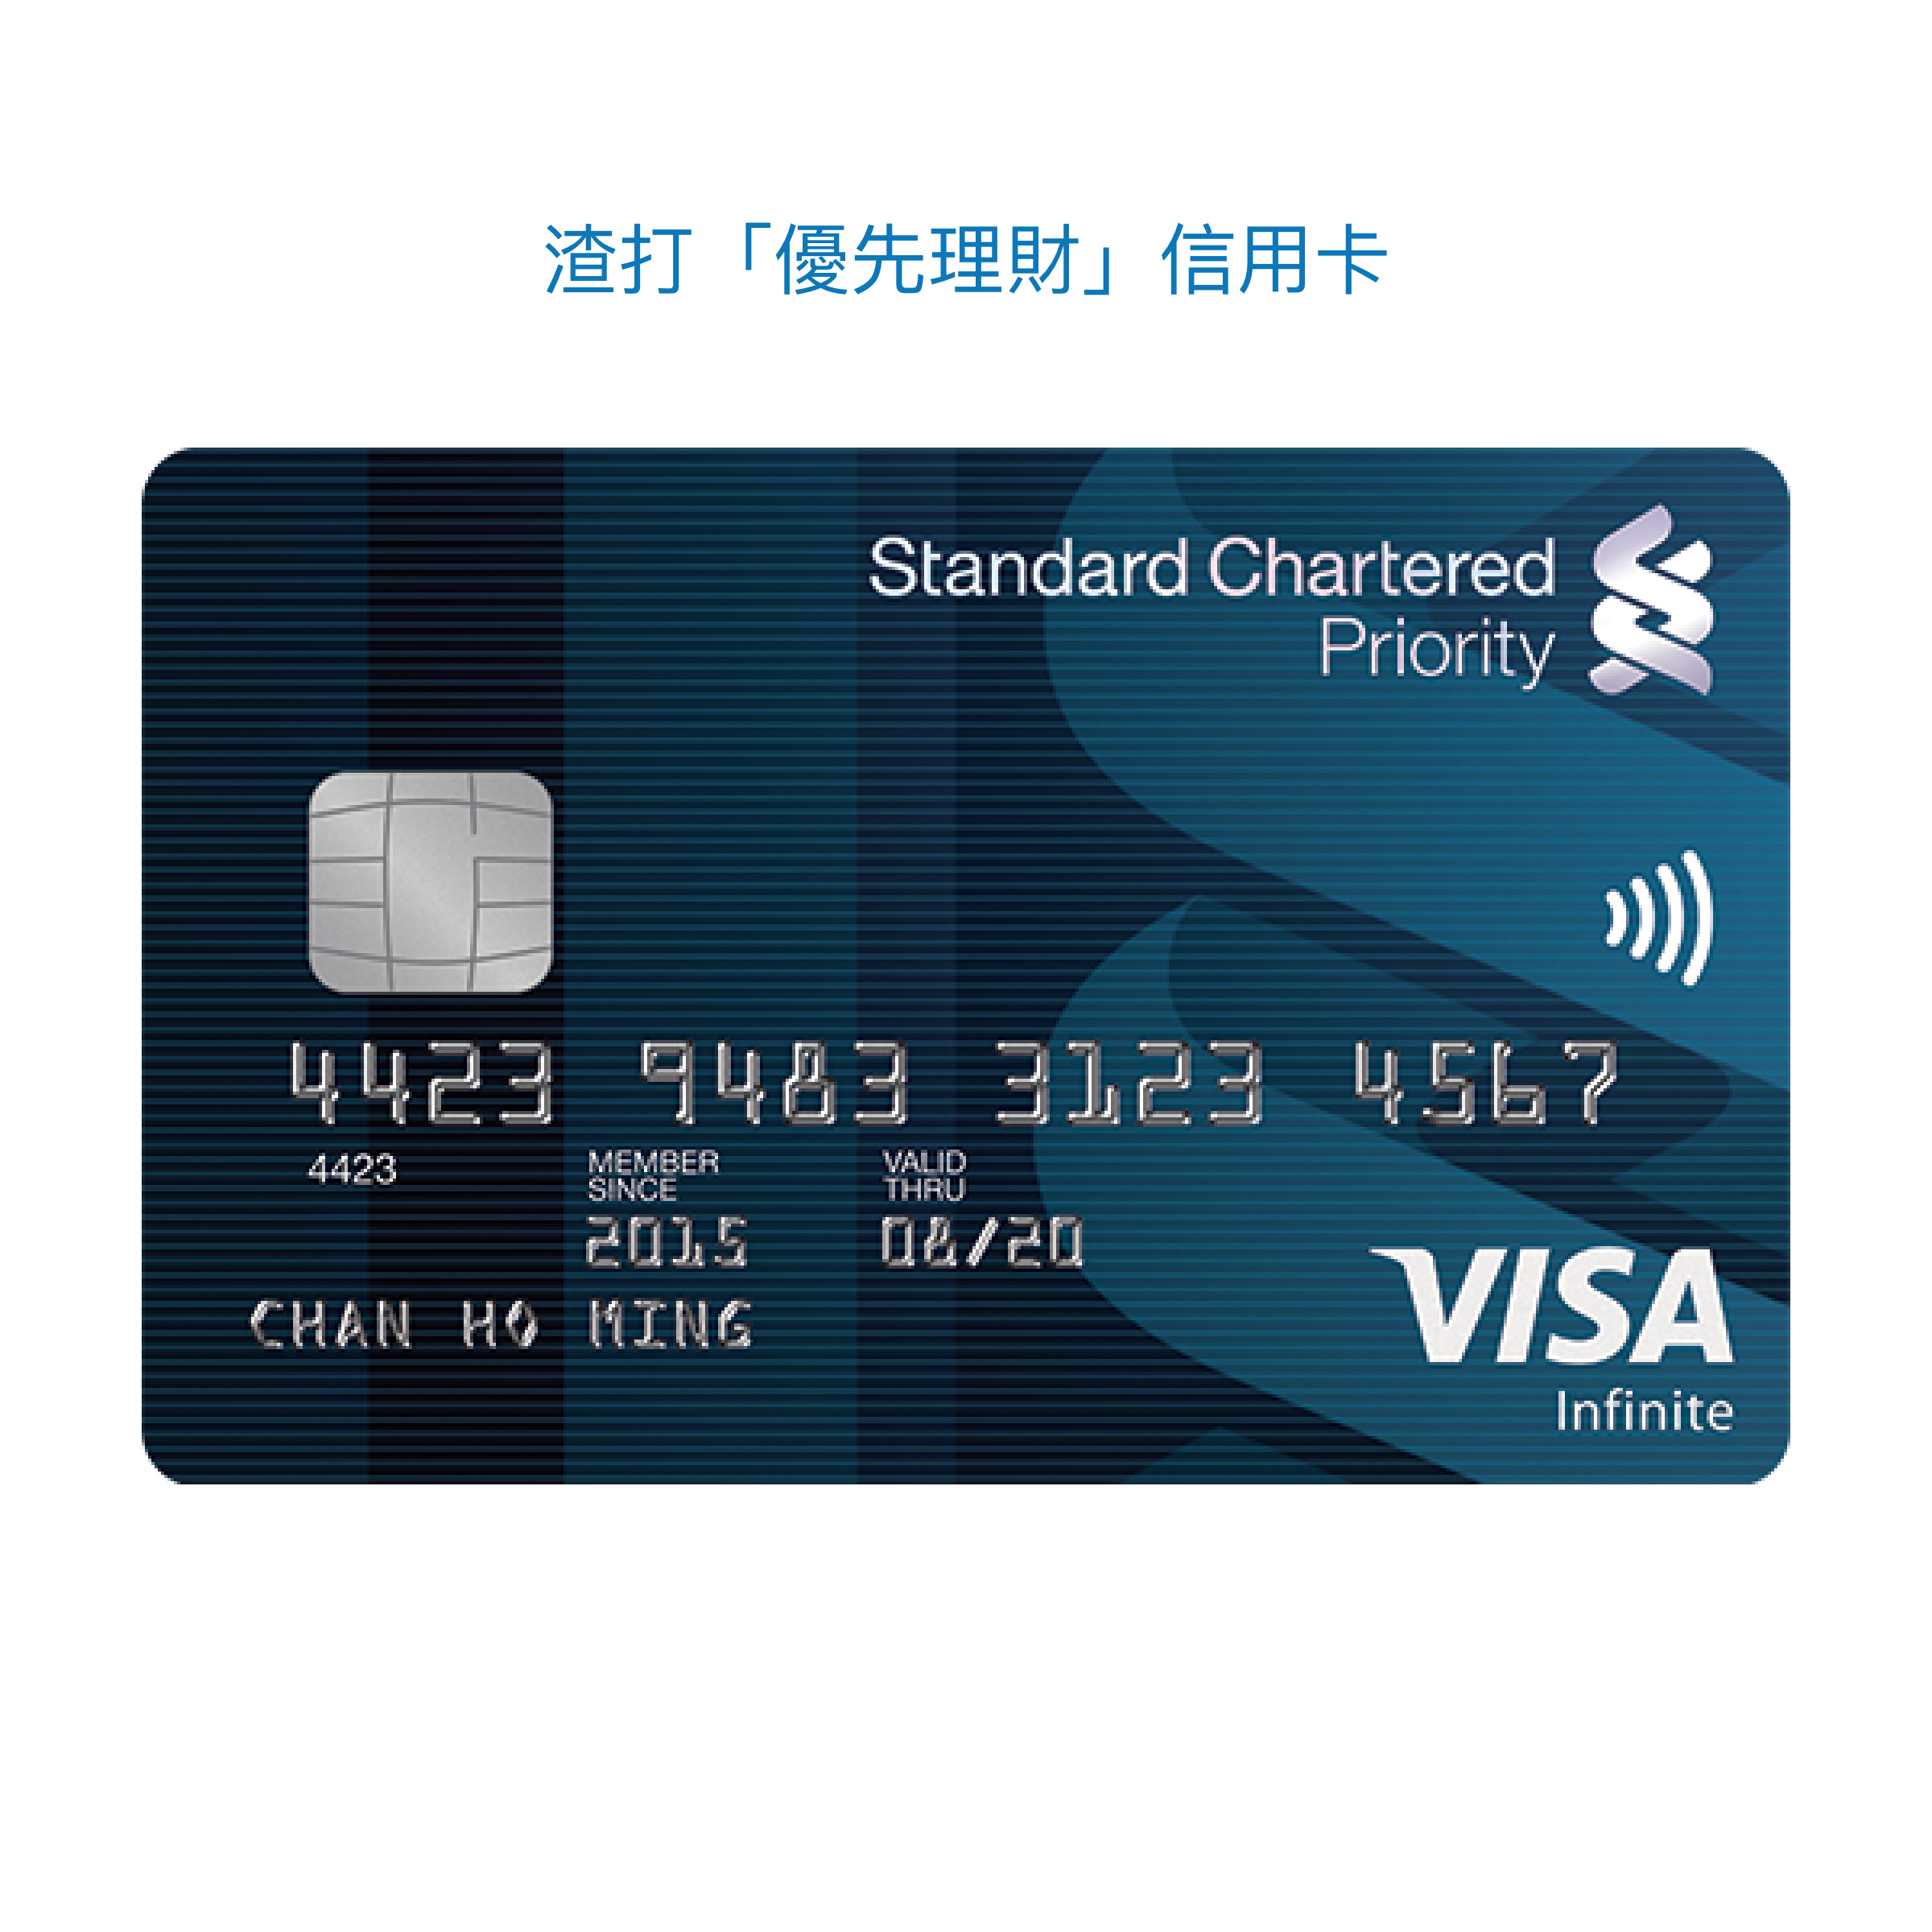 Cc category page – priority banking credit card